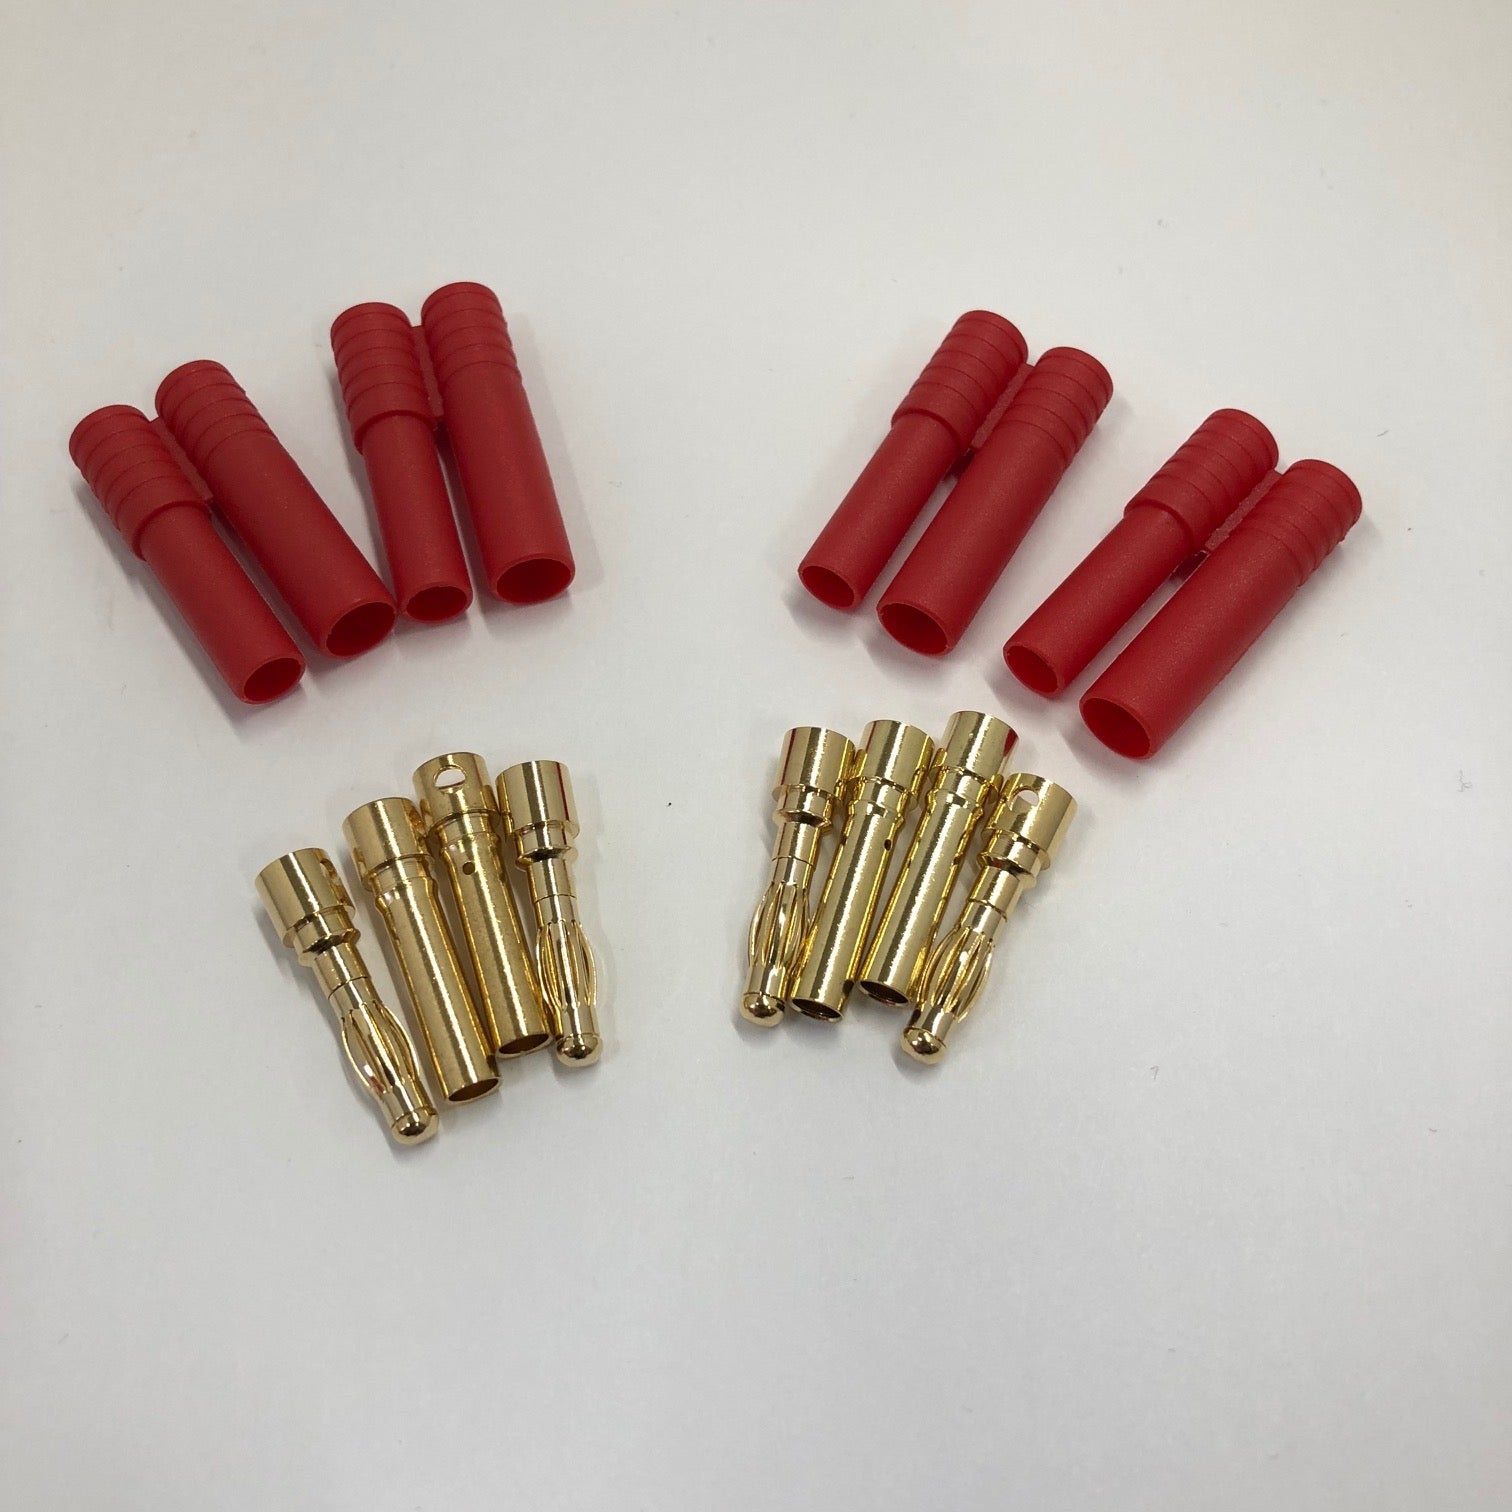 HXT 4mm Connector Set - 2 Pairs